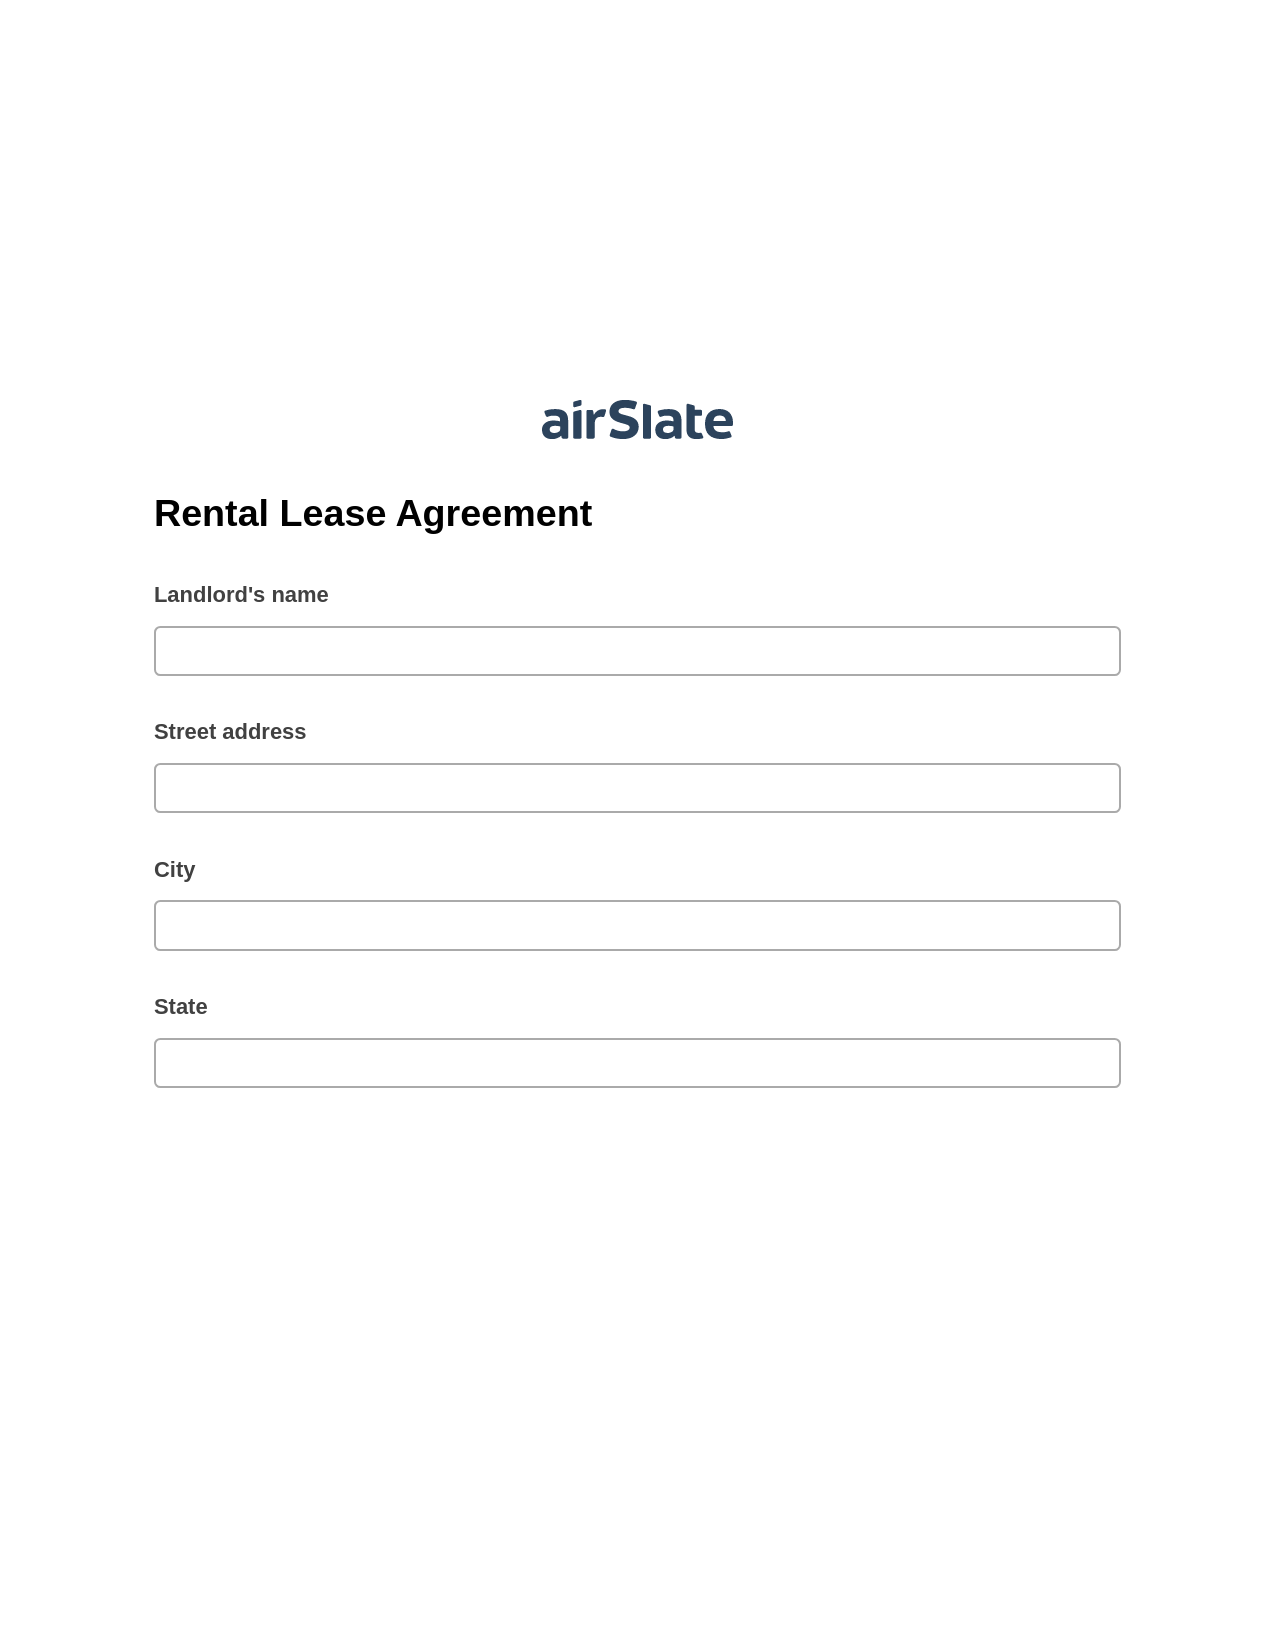 Rental Lease Agreement Pre-fill from CSV File Bot, Update Salesforce Record Bot, Slack Notification Postfinish Bot